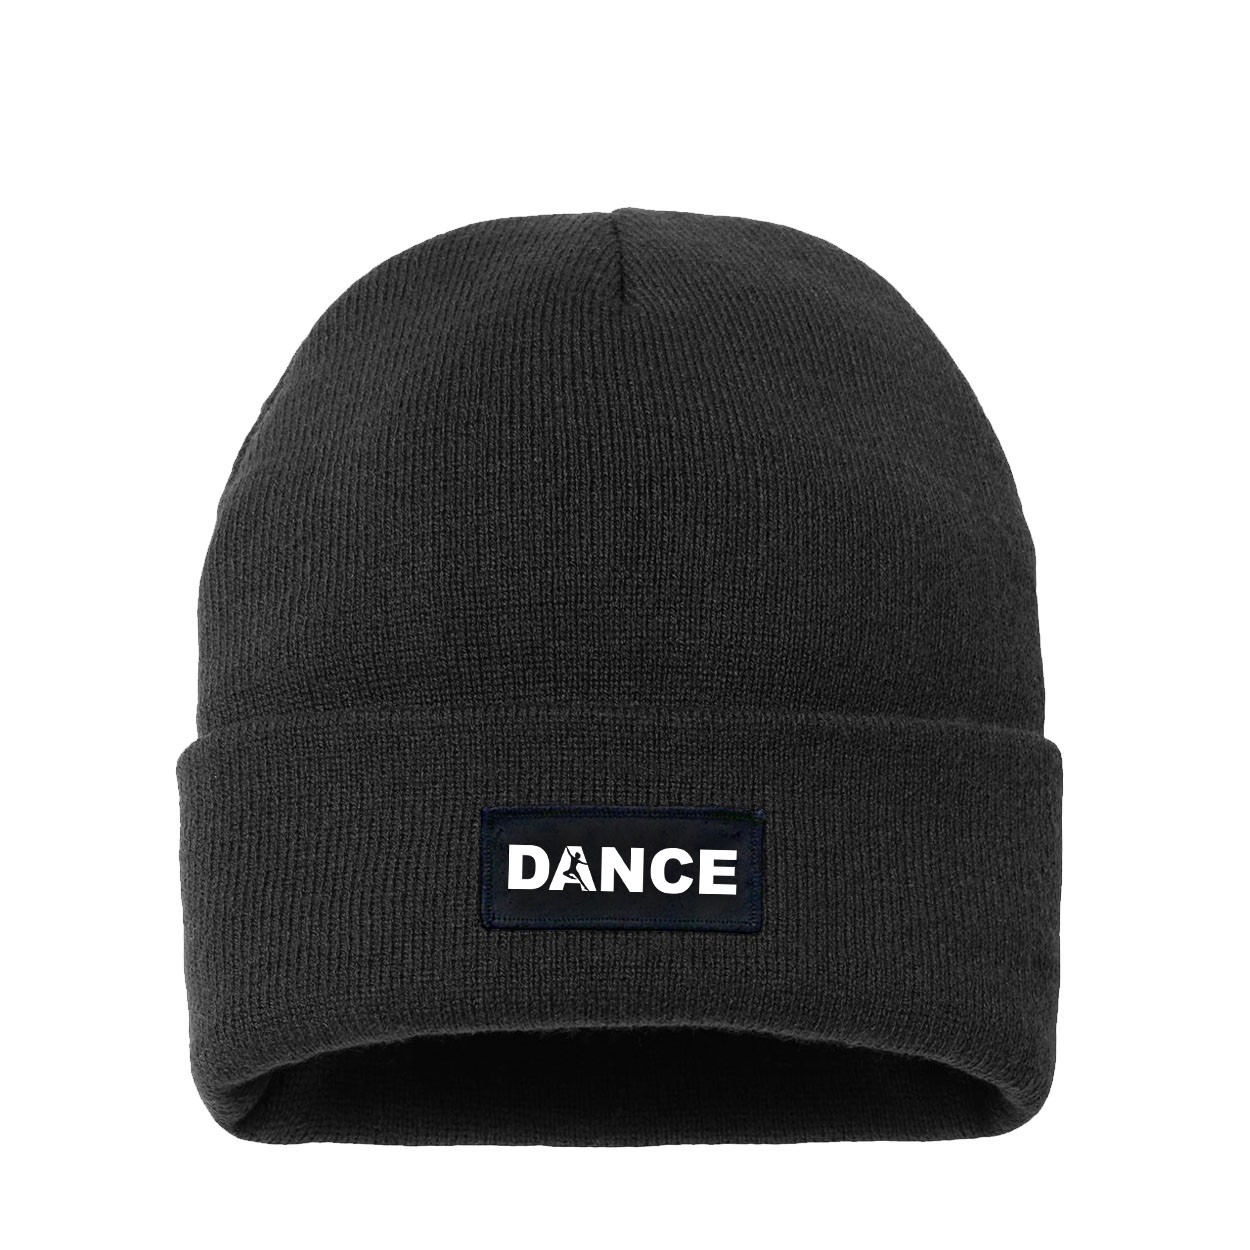 Dance Silhouette Logo Night Out Woven Patch Night Out Sherpa Lined Cuffed Beanie Black (White Logo)